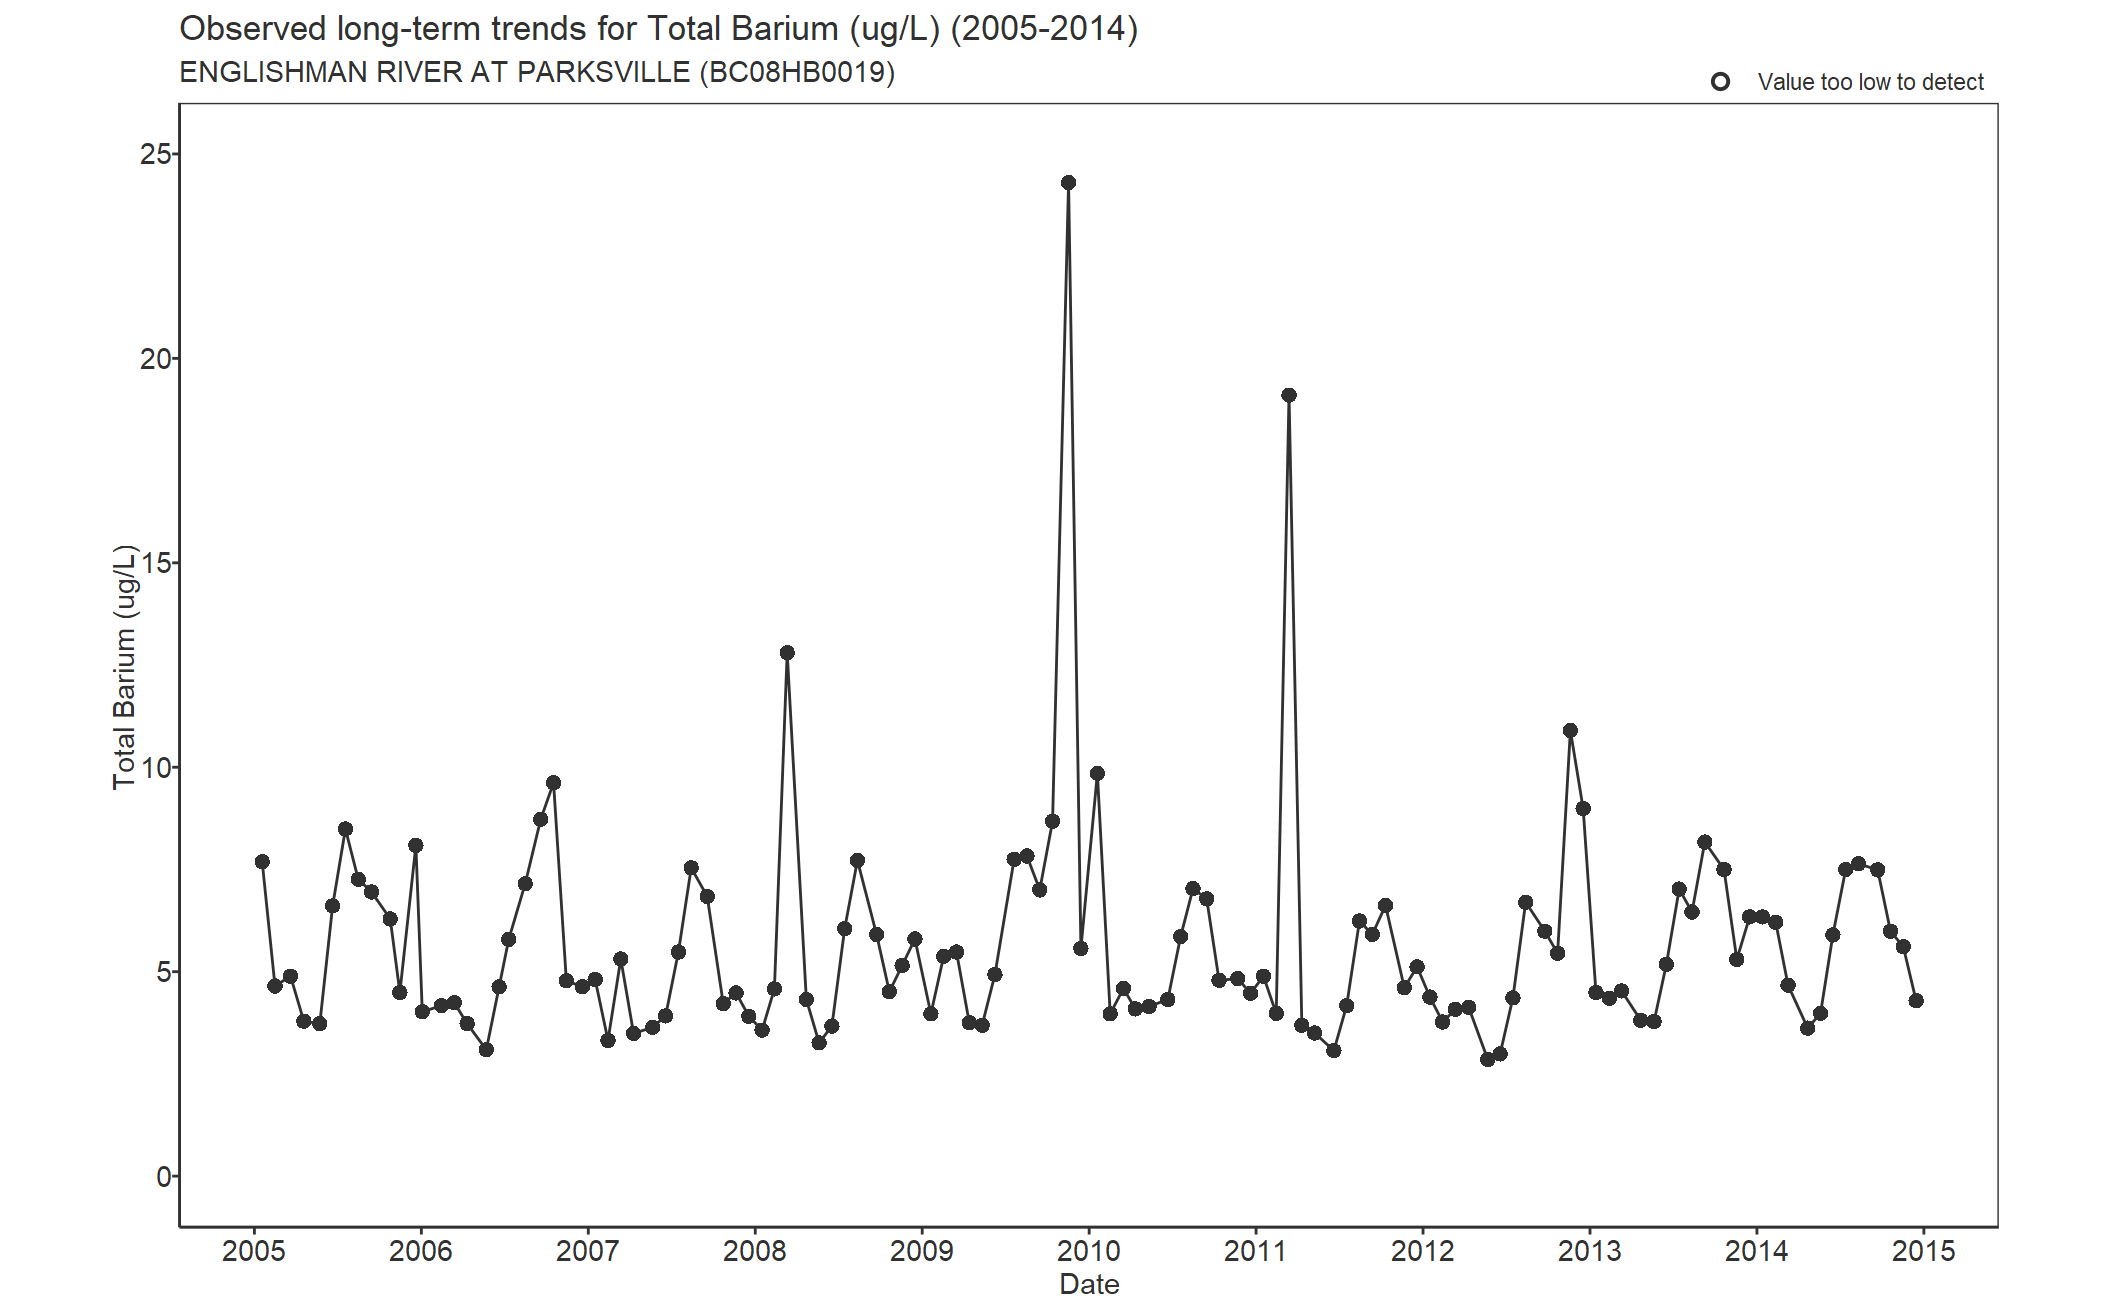 Observed long-term trends for Total Barium (2005-2014)